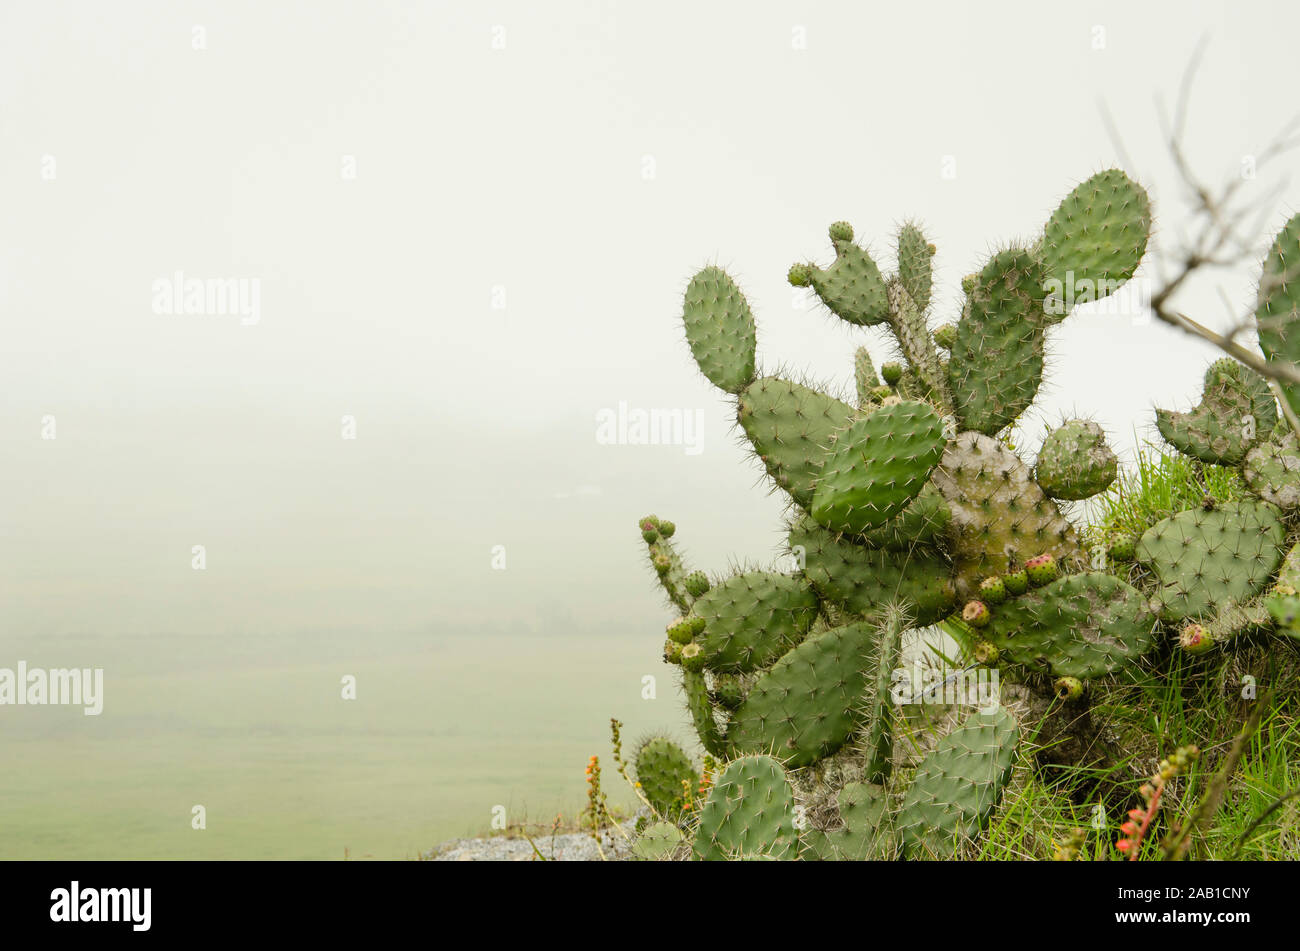 Prickly pear cactus, nopal, in a cloudy environment, in the Colombian Andes Stock Photo